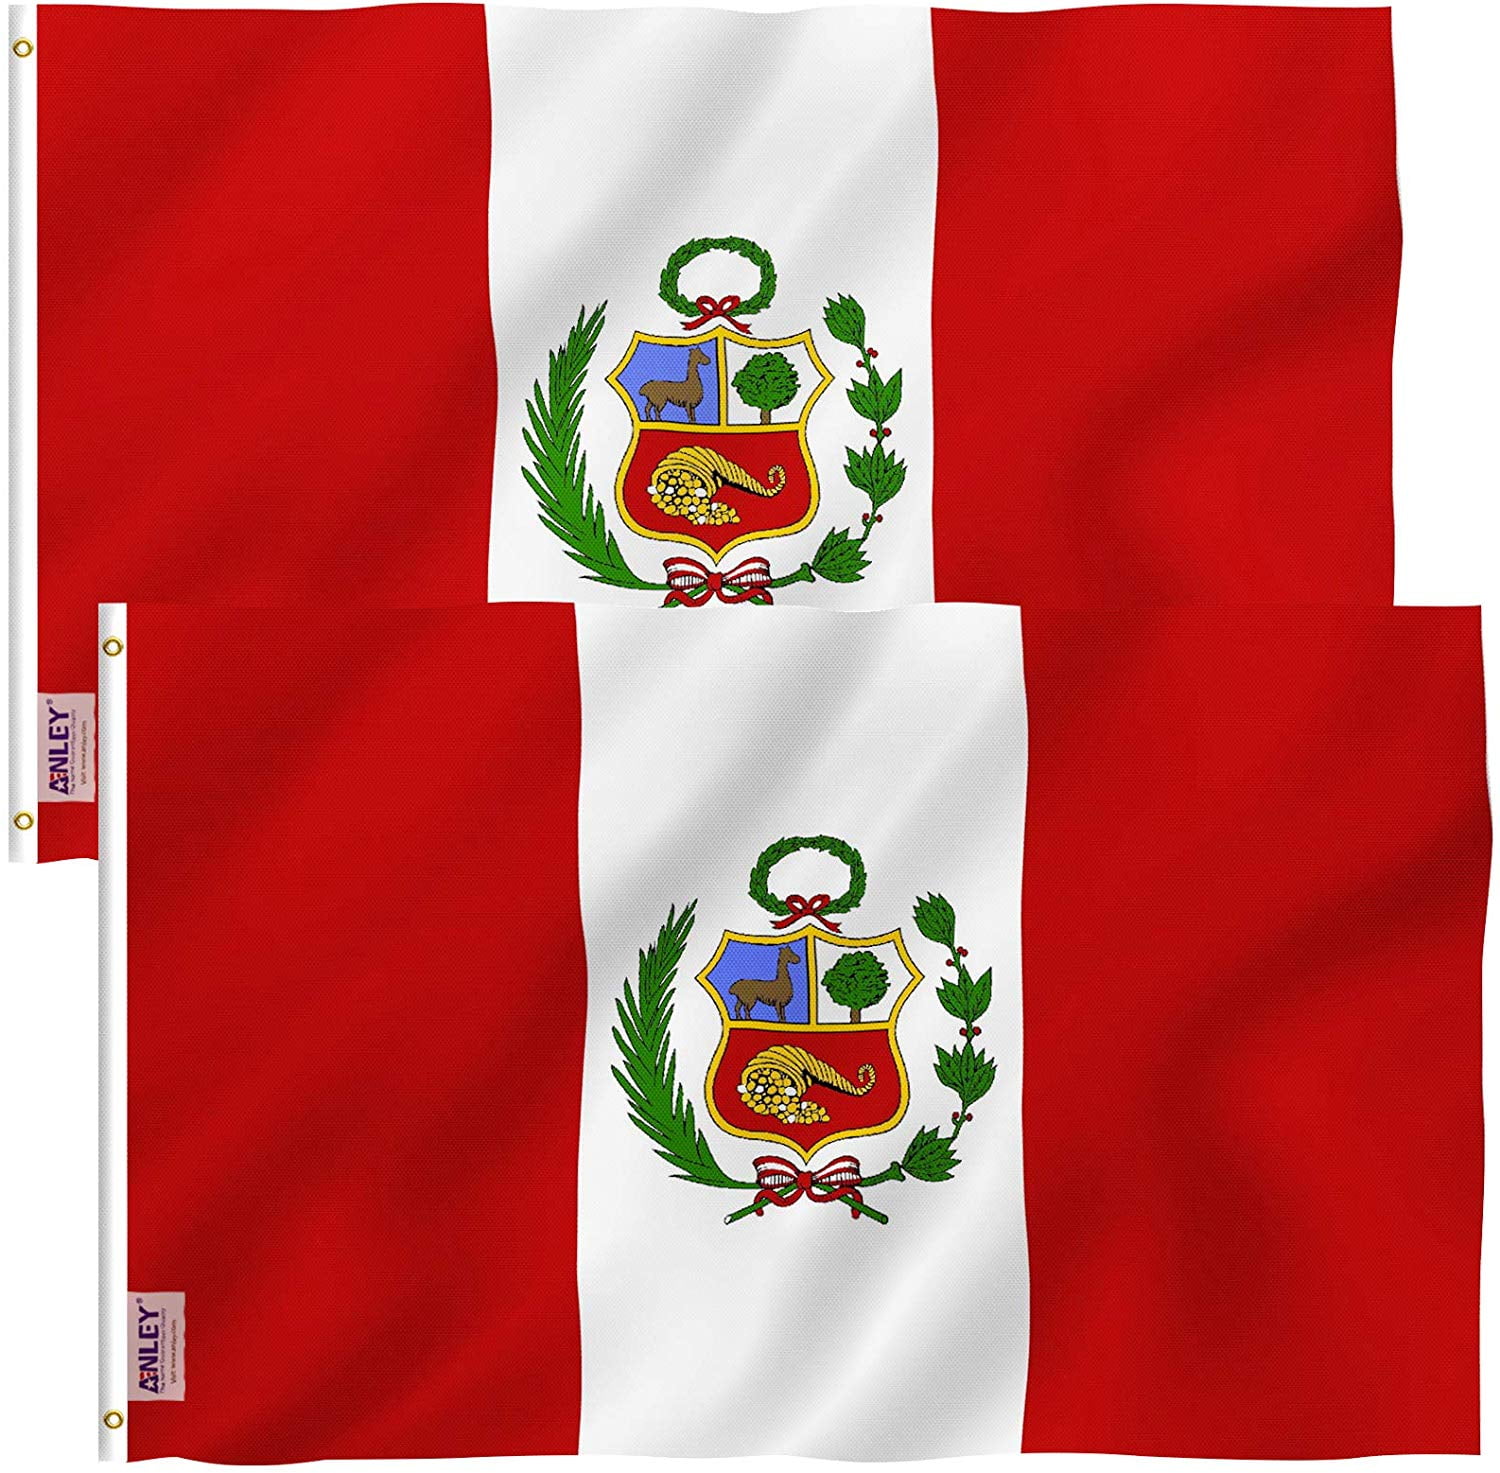 PERUVIAN NATIONAL FLAG OF PERU SOUTH AMERICA 5 X 3 LARGE GREAT VALUE NEW 